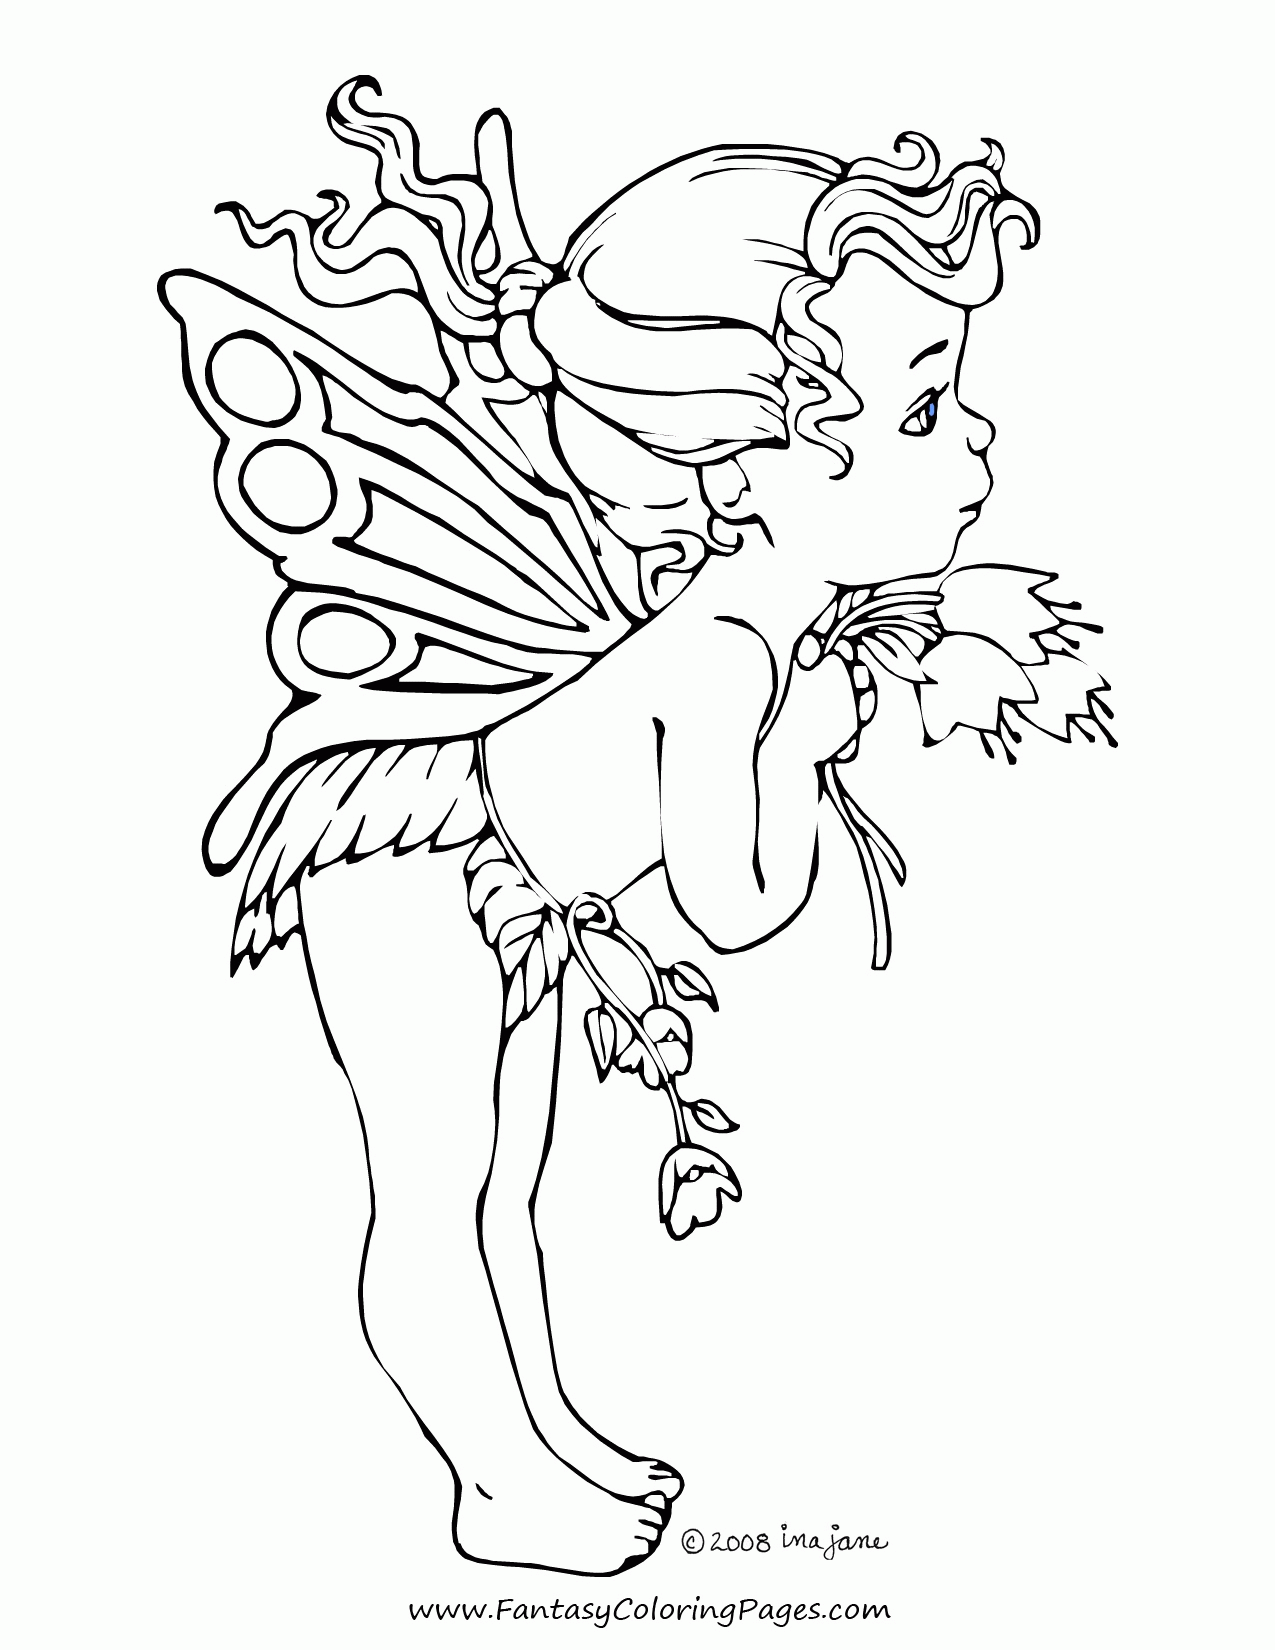 Printable Fantasy Coloring Pages For Adults Fantasy Coloring Pages ...